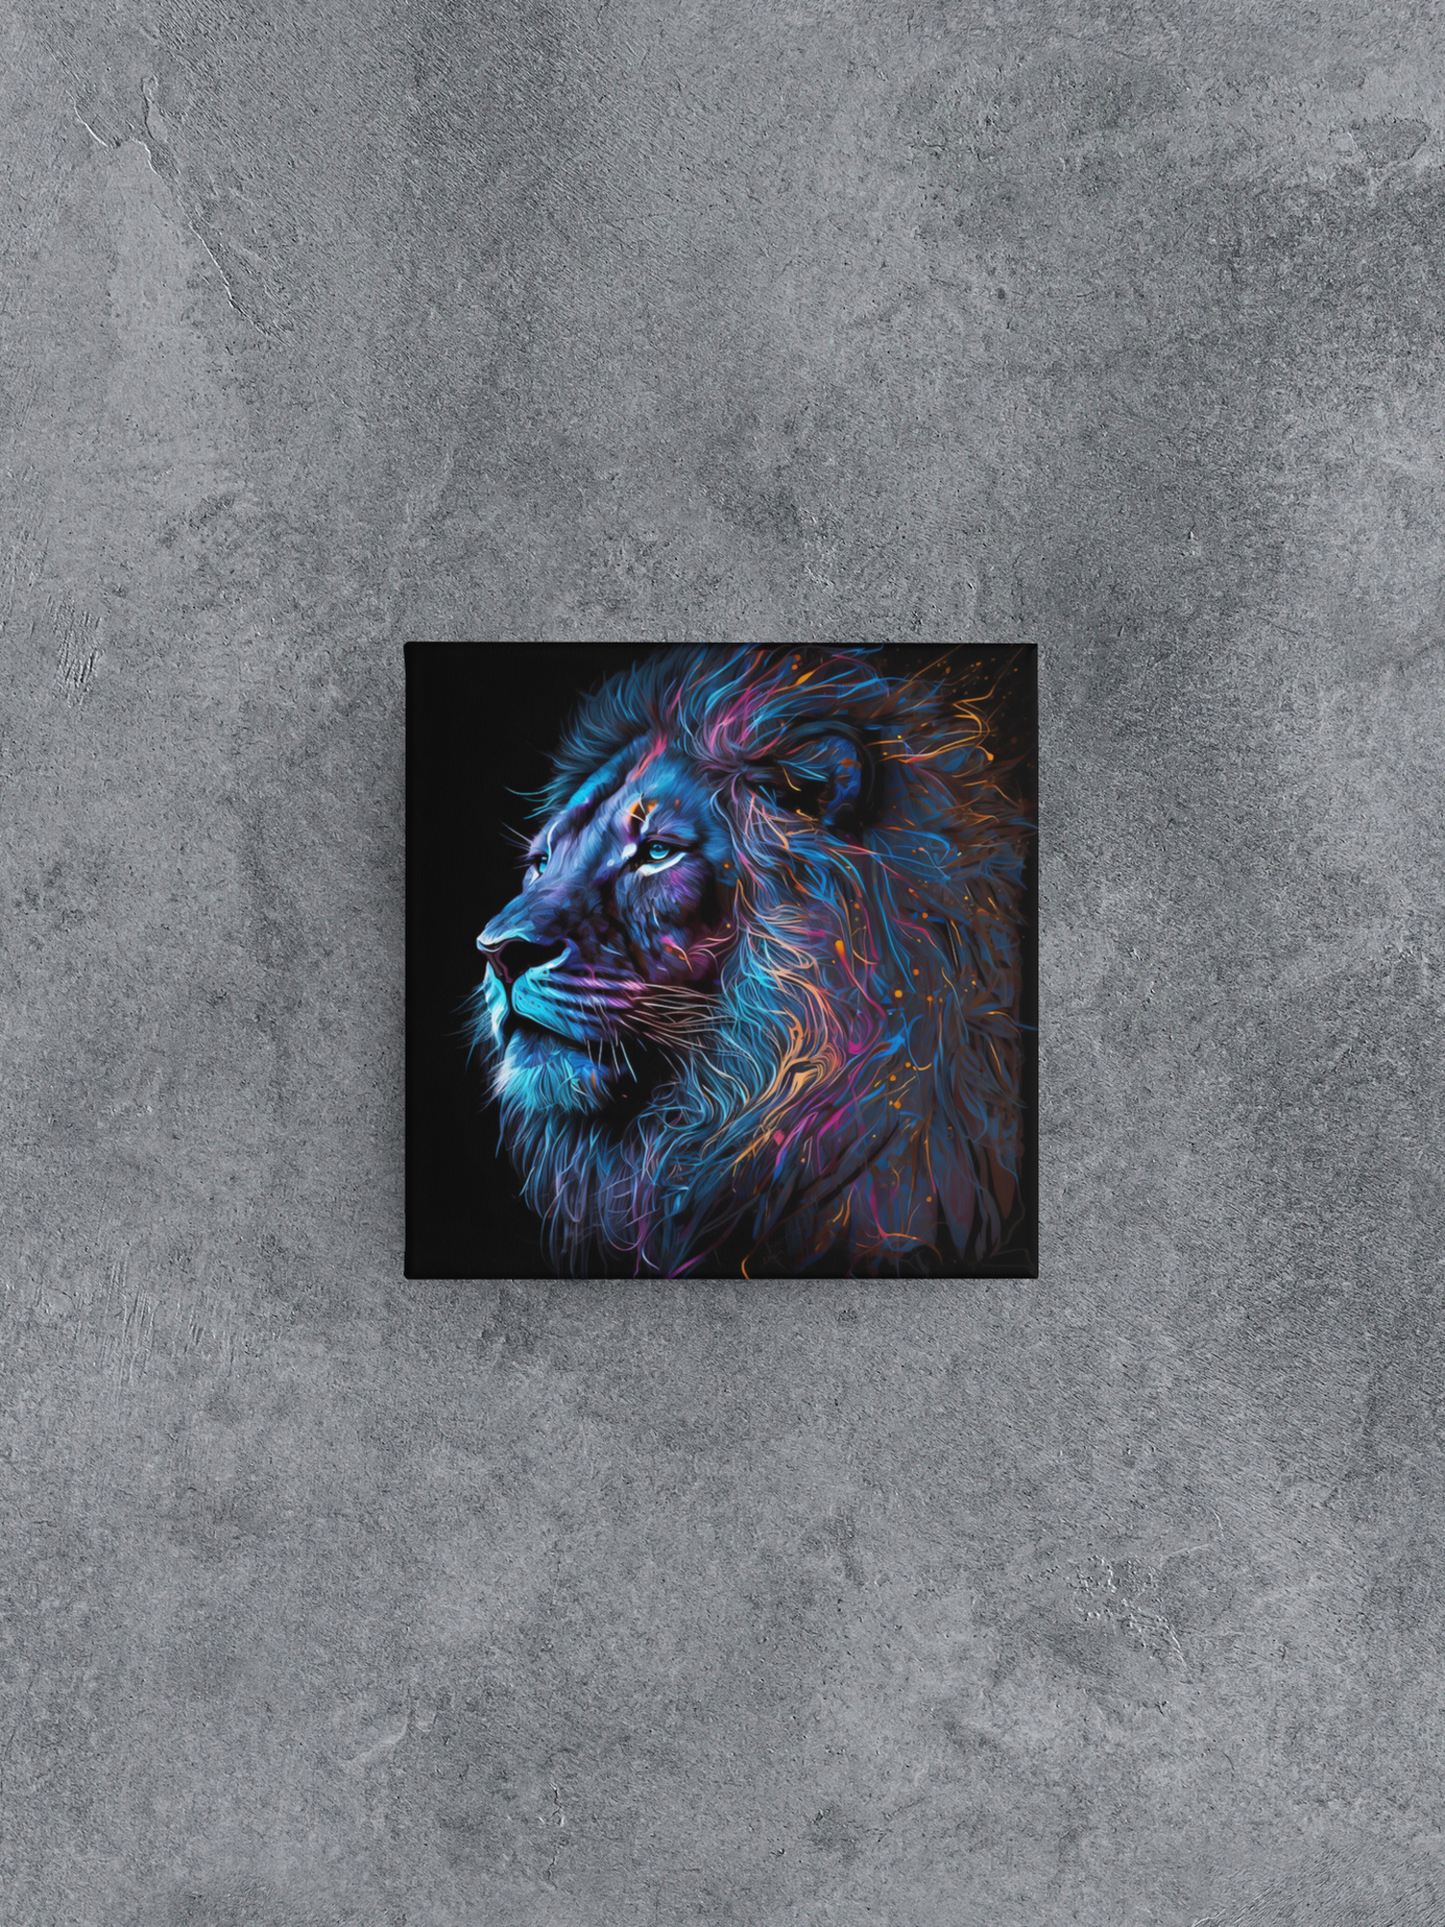 Black Light Lion Canvas Wall Art, Neon Lion Canvas Painting, Glowing Lion Painting on Black Background, Colorful Lion Canvas